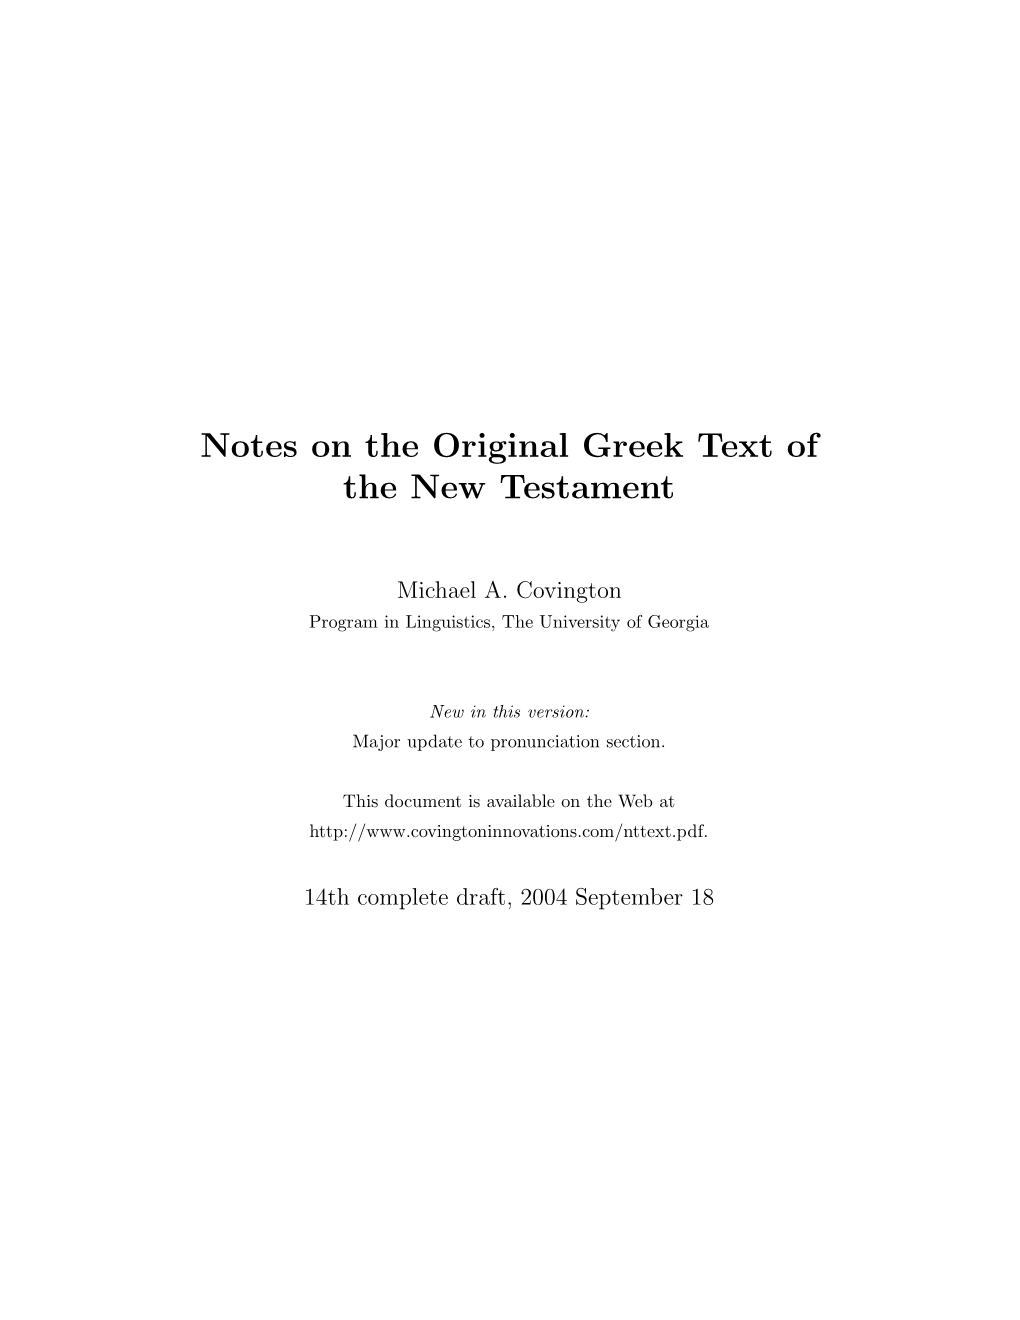 Notes on the Original Greek Text of the New Testament